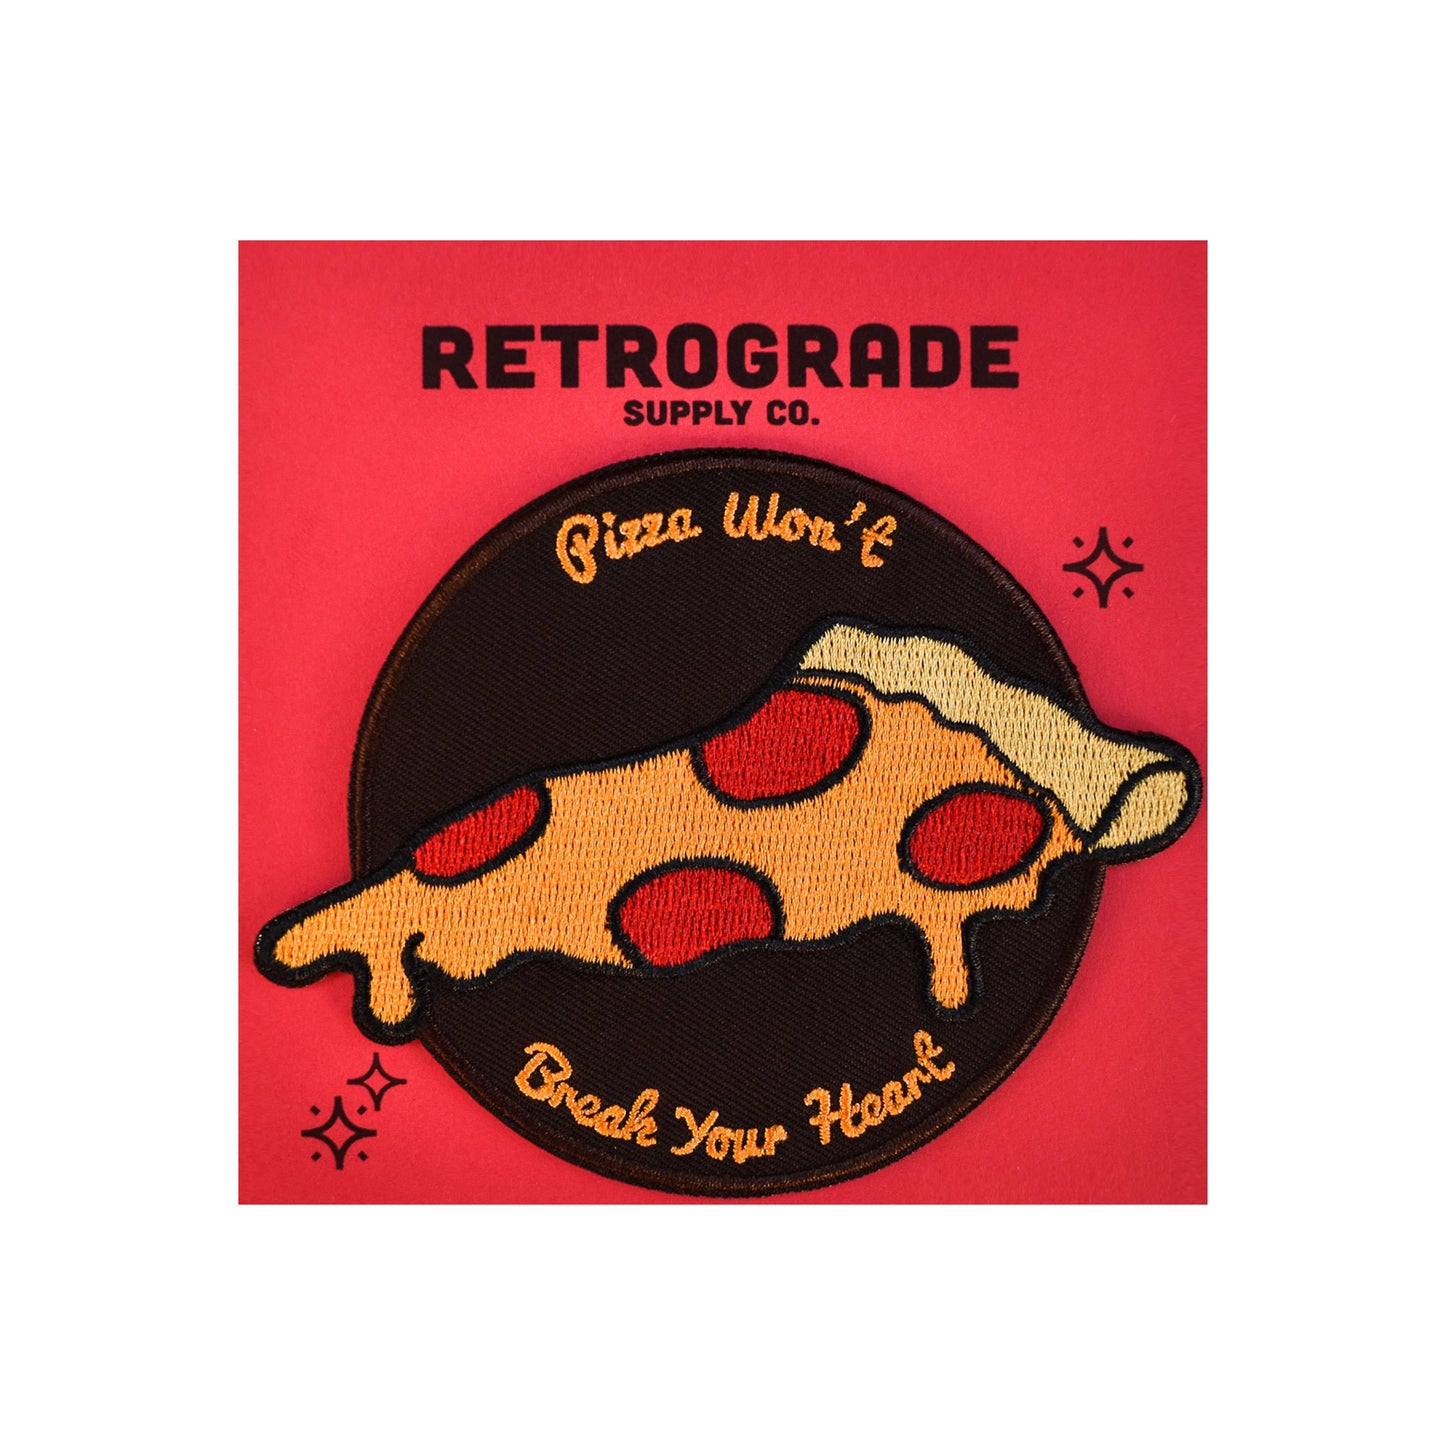 Pizza Won't Break Your Heart Embroidered Patch